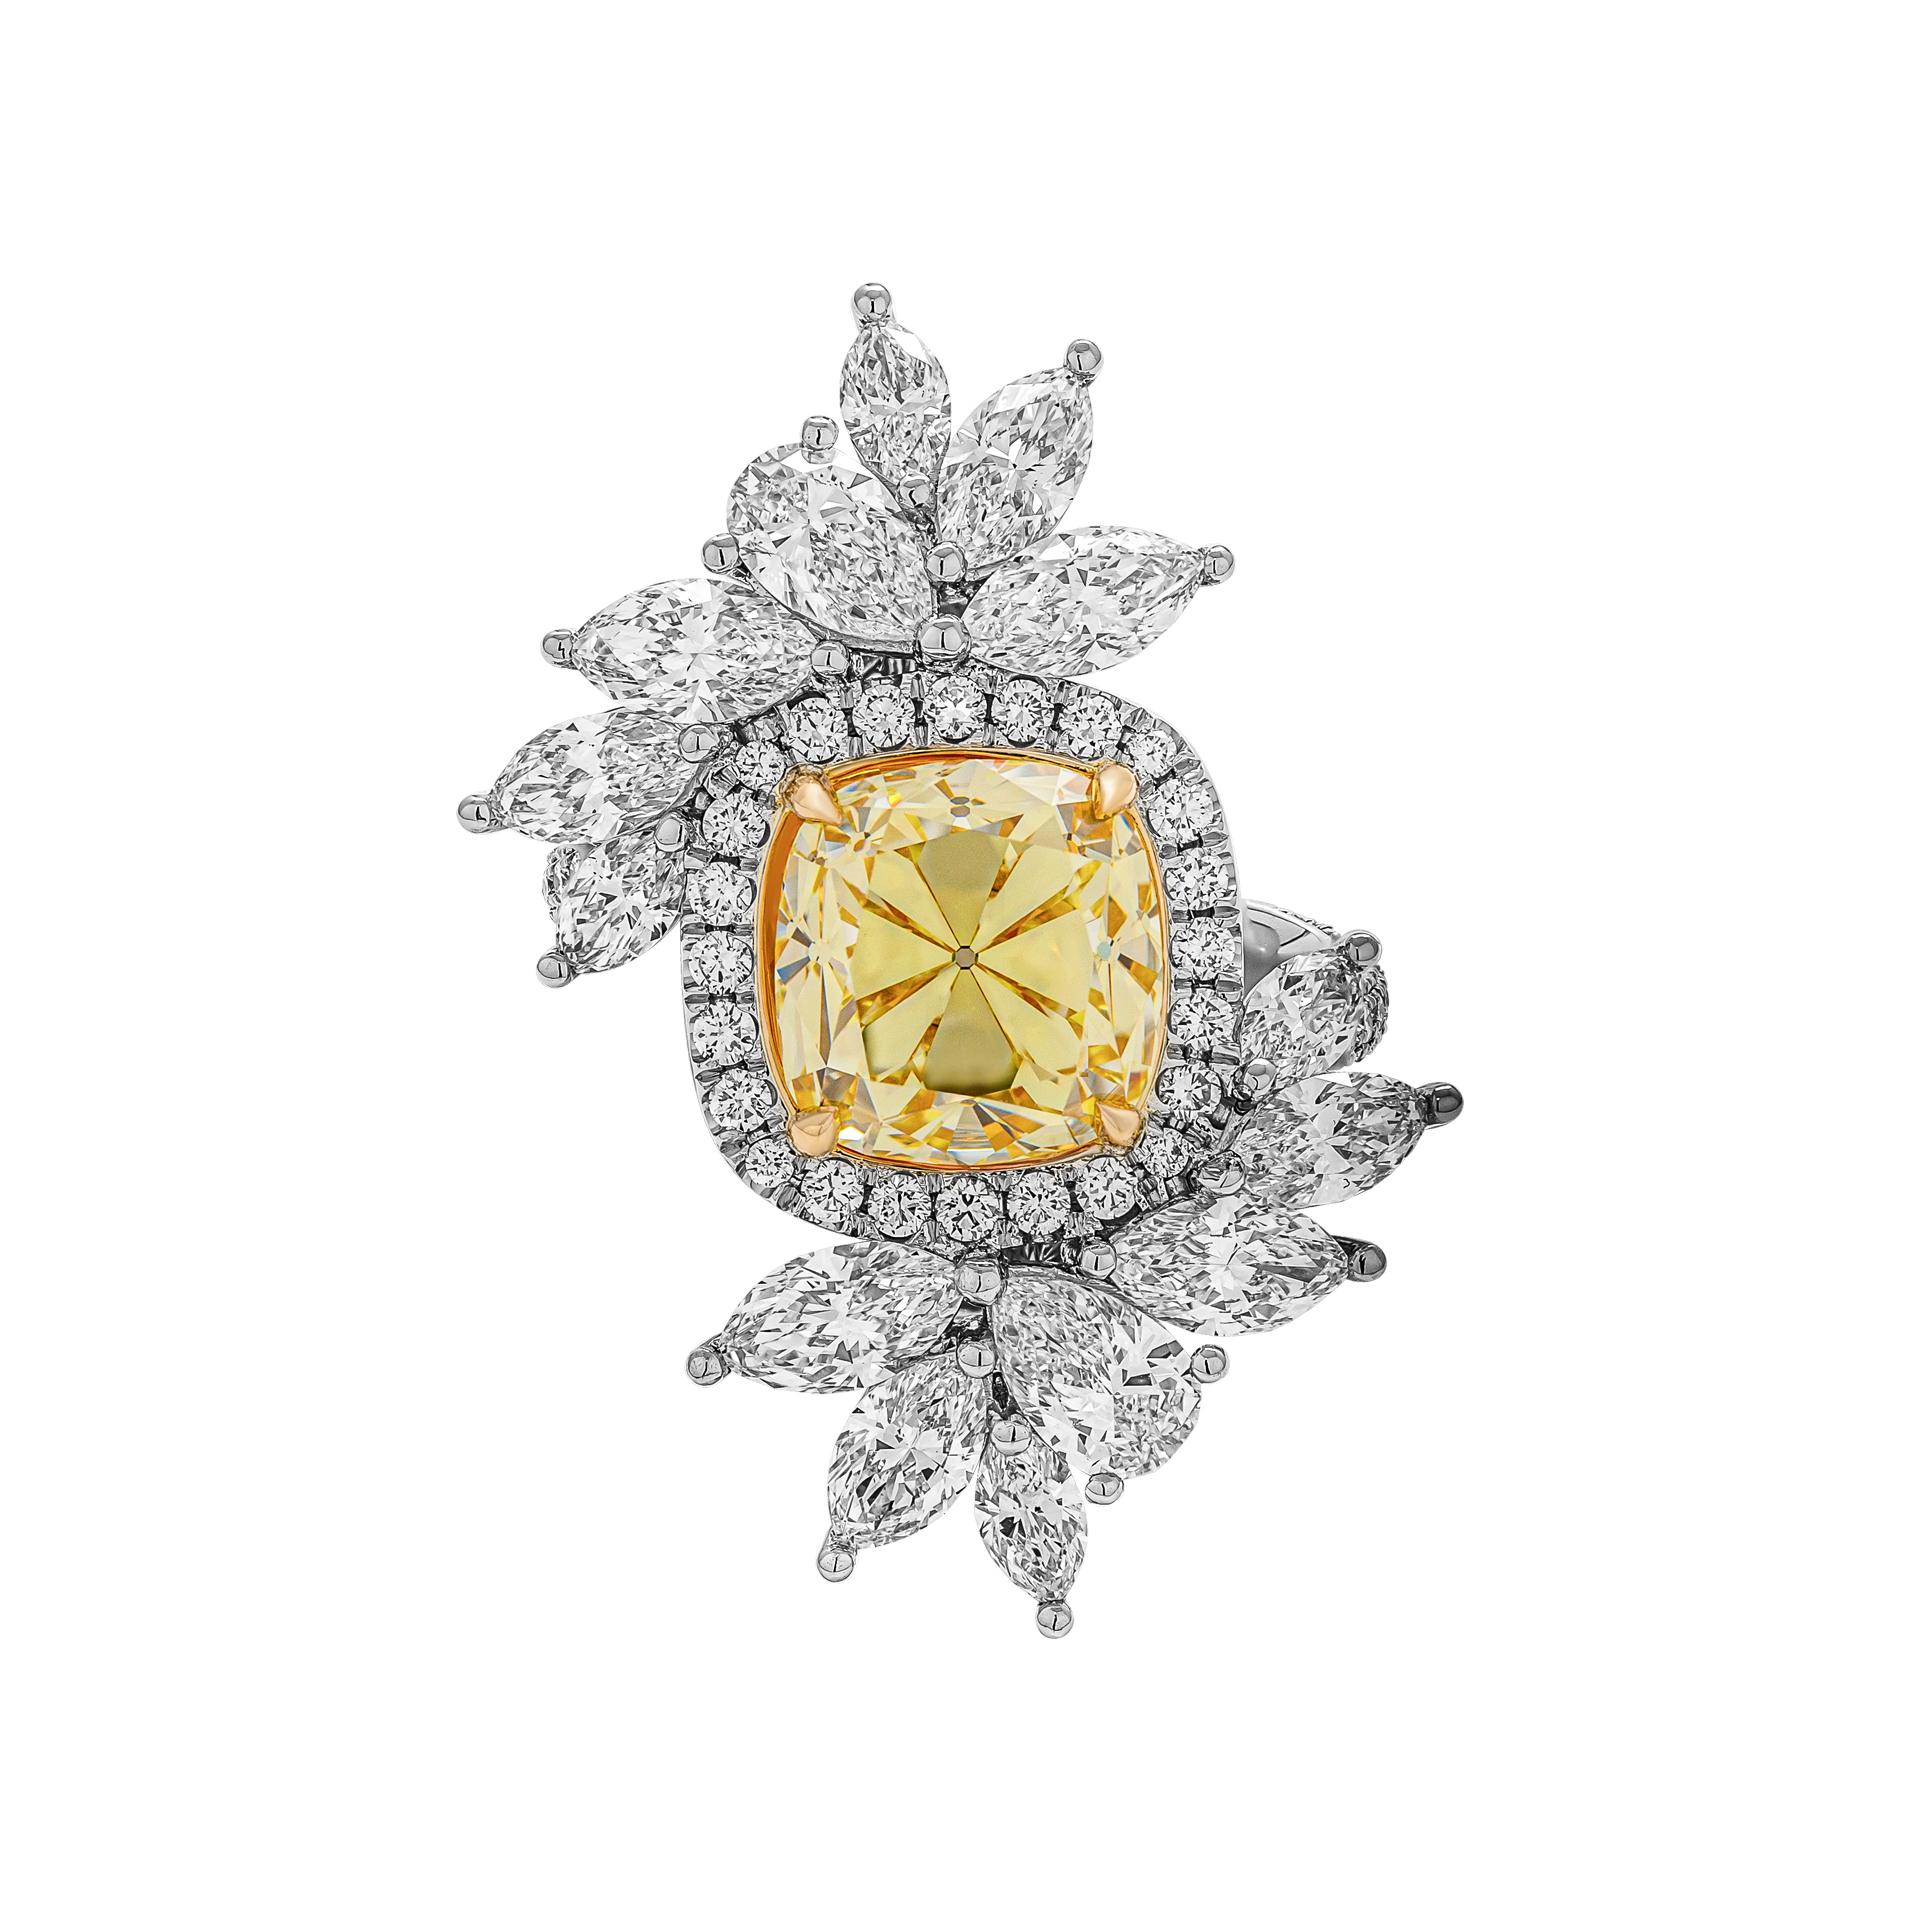 Custom made platinum and 18kt yellow gold ring featuring one GIA certified 4.13ct Fancy Intense Yellow Vs1 Cushion Brilliant Cut diamond, 12 x Marquise Cut white diamonds, 2.24ct and 2 x Pear shaped white diamonds, 0.56ct.